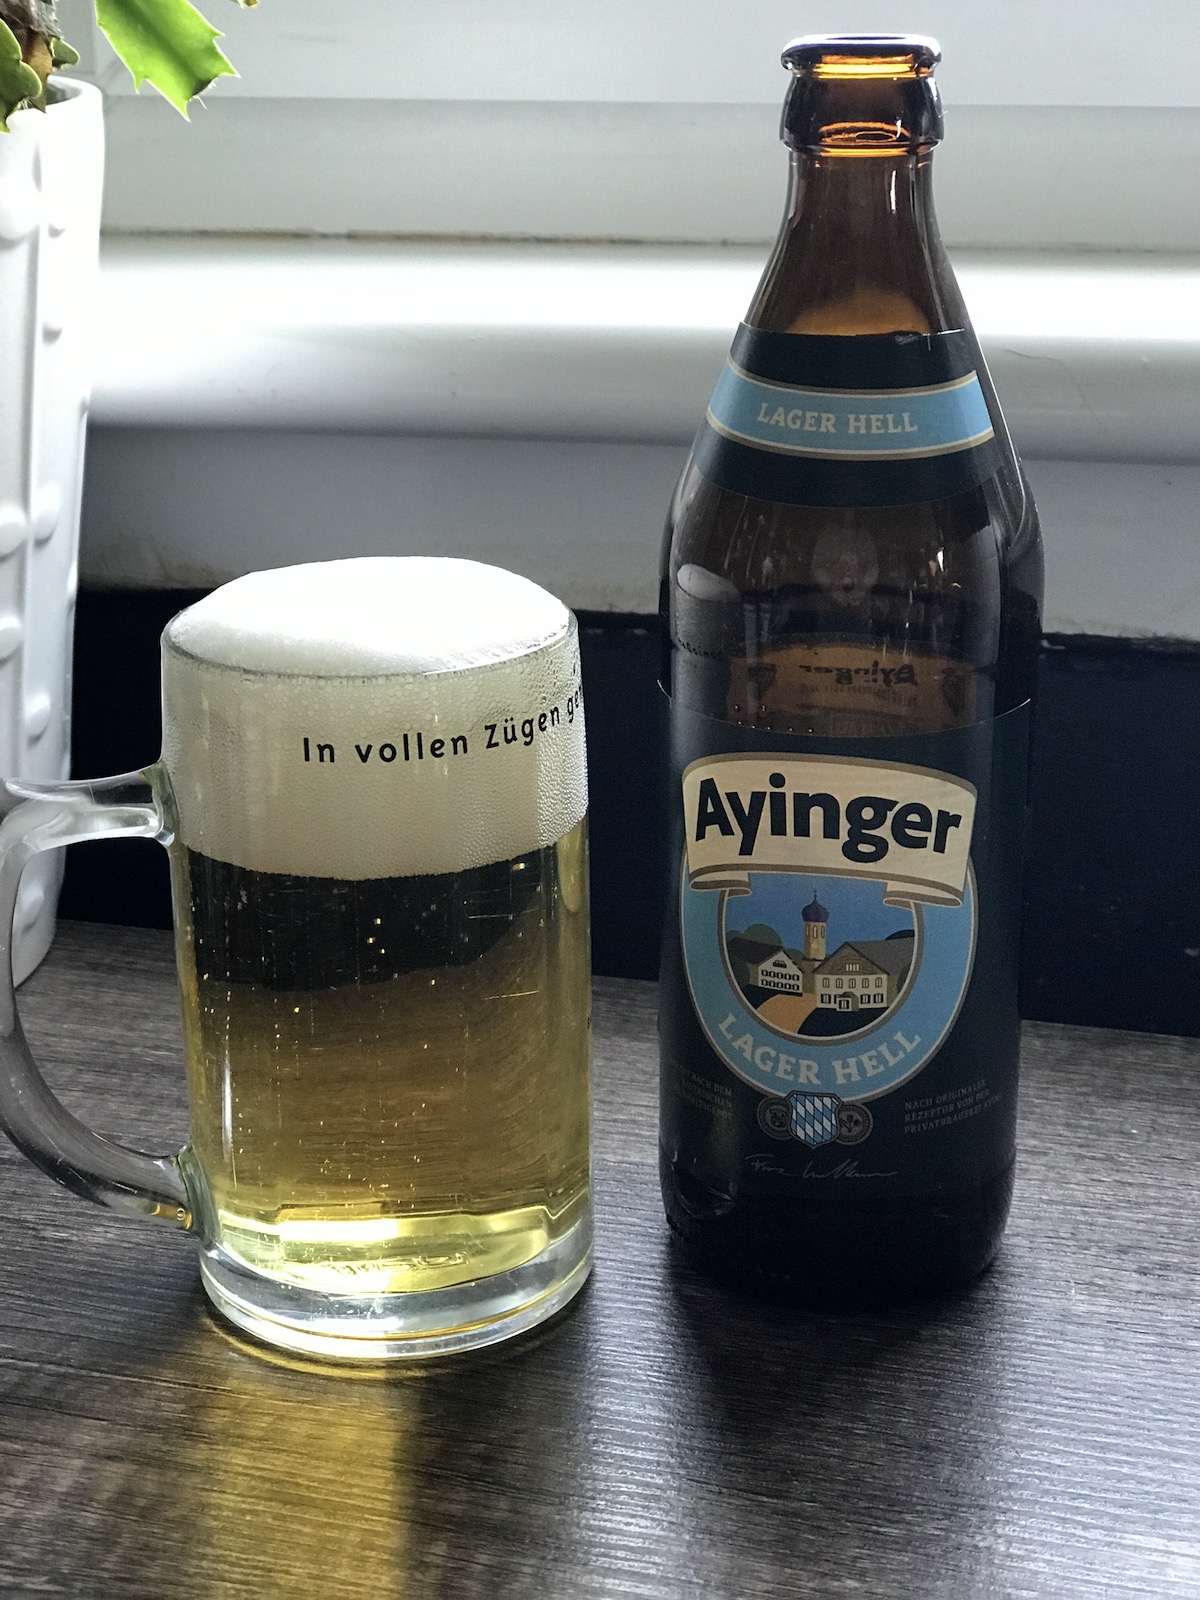 The Beer Town Ayinger